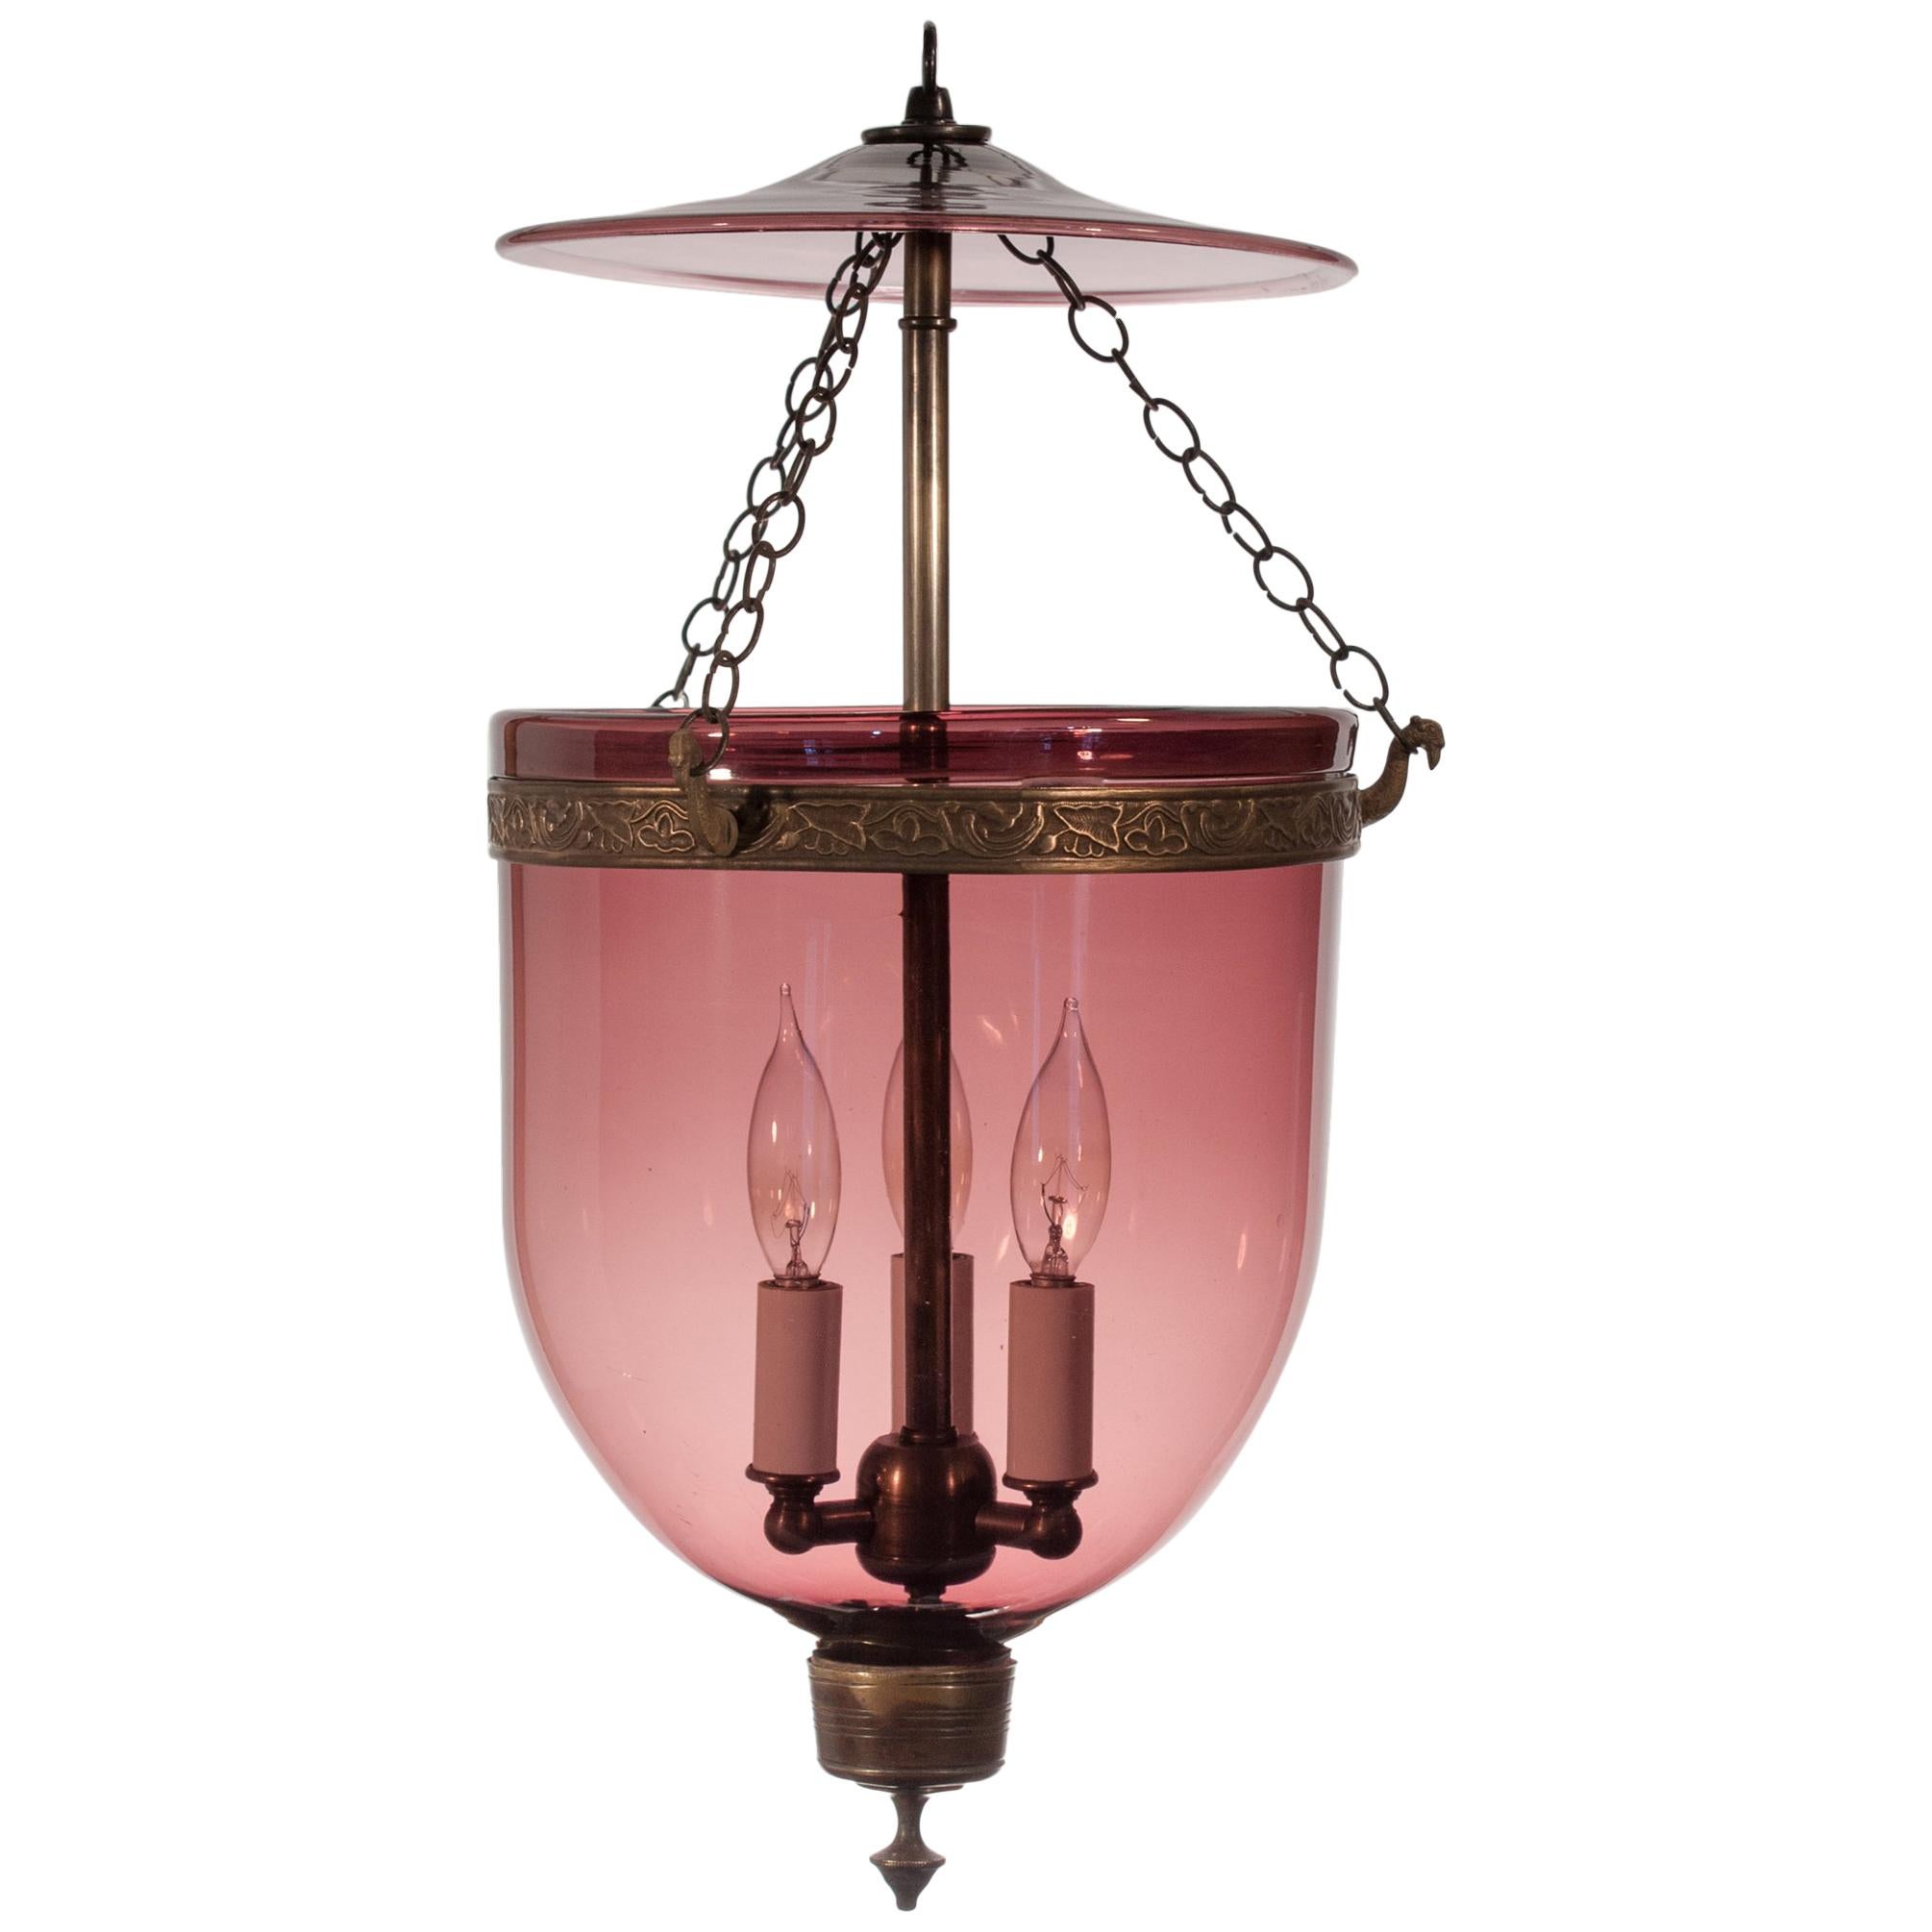 19th Century Bell Jar Lantern with Amethyst Colored Glass